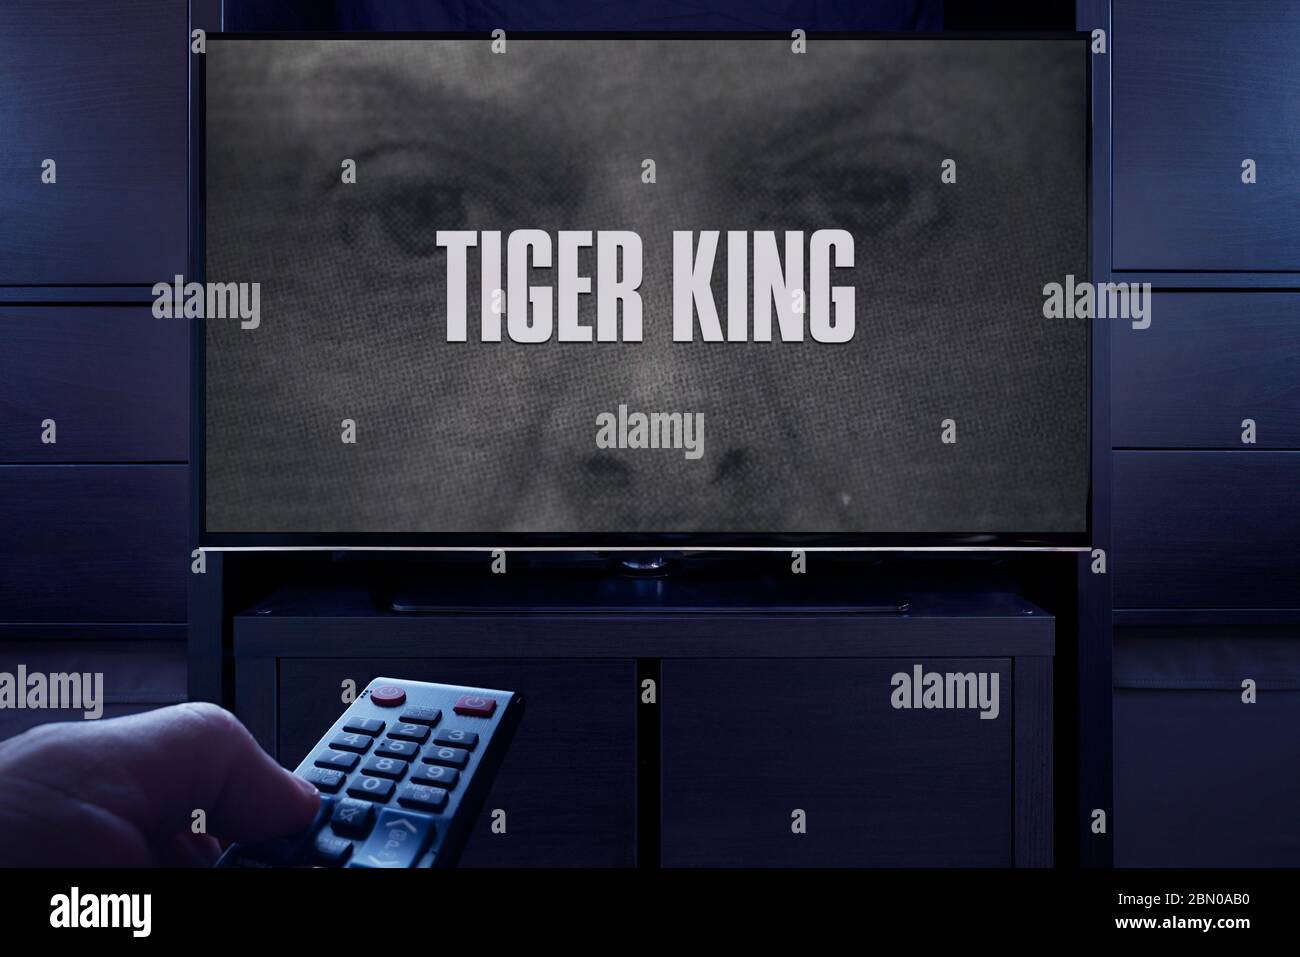 A man points a TV remote at the television which displays the Tiger King main title screen (Editorial use only). Stock Photo